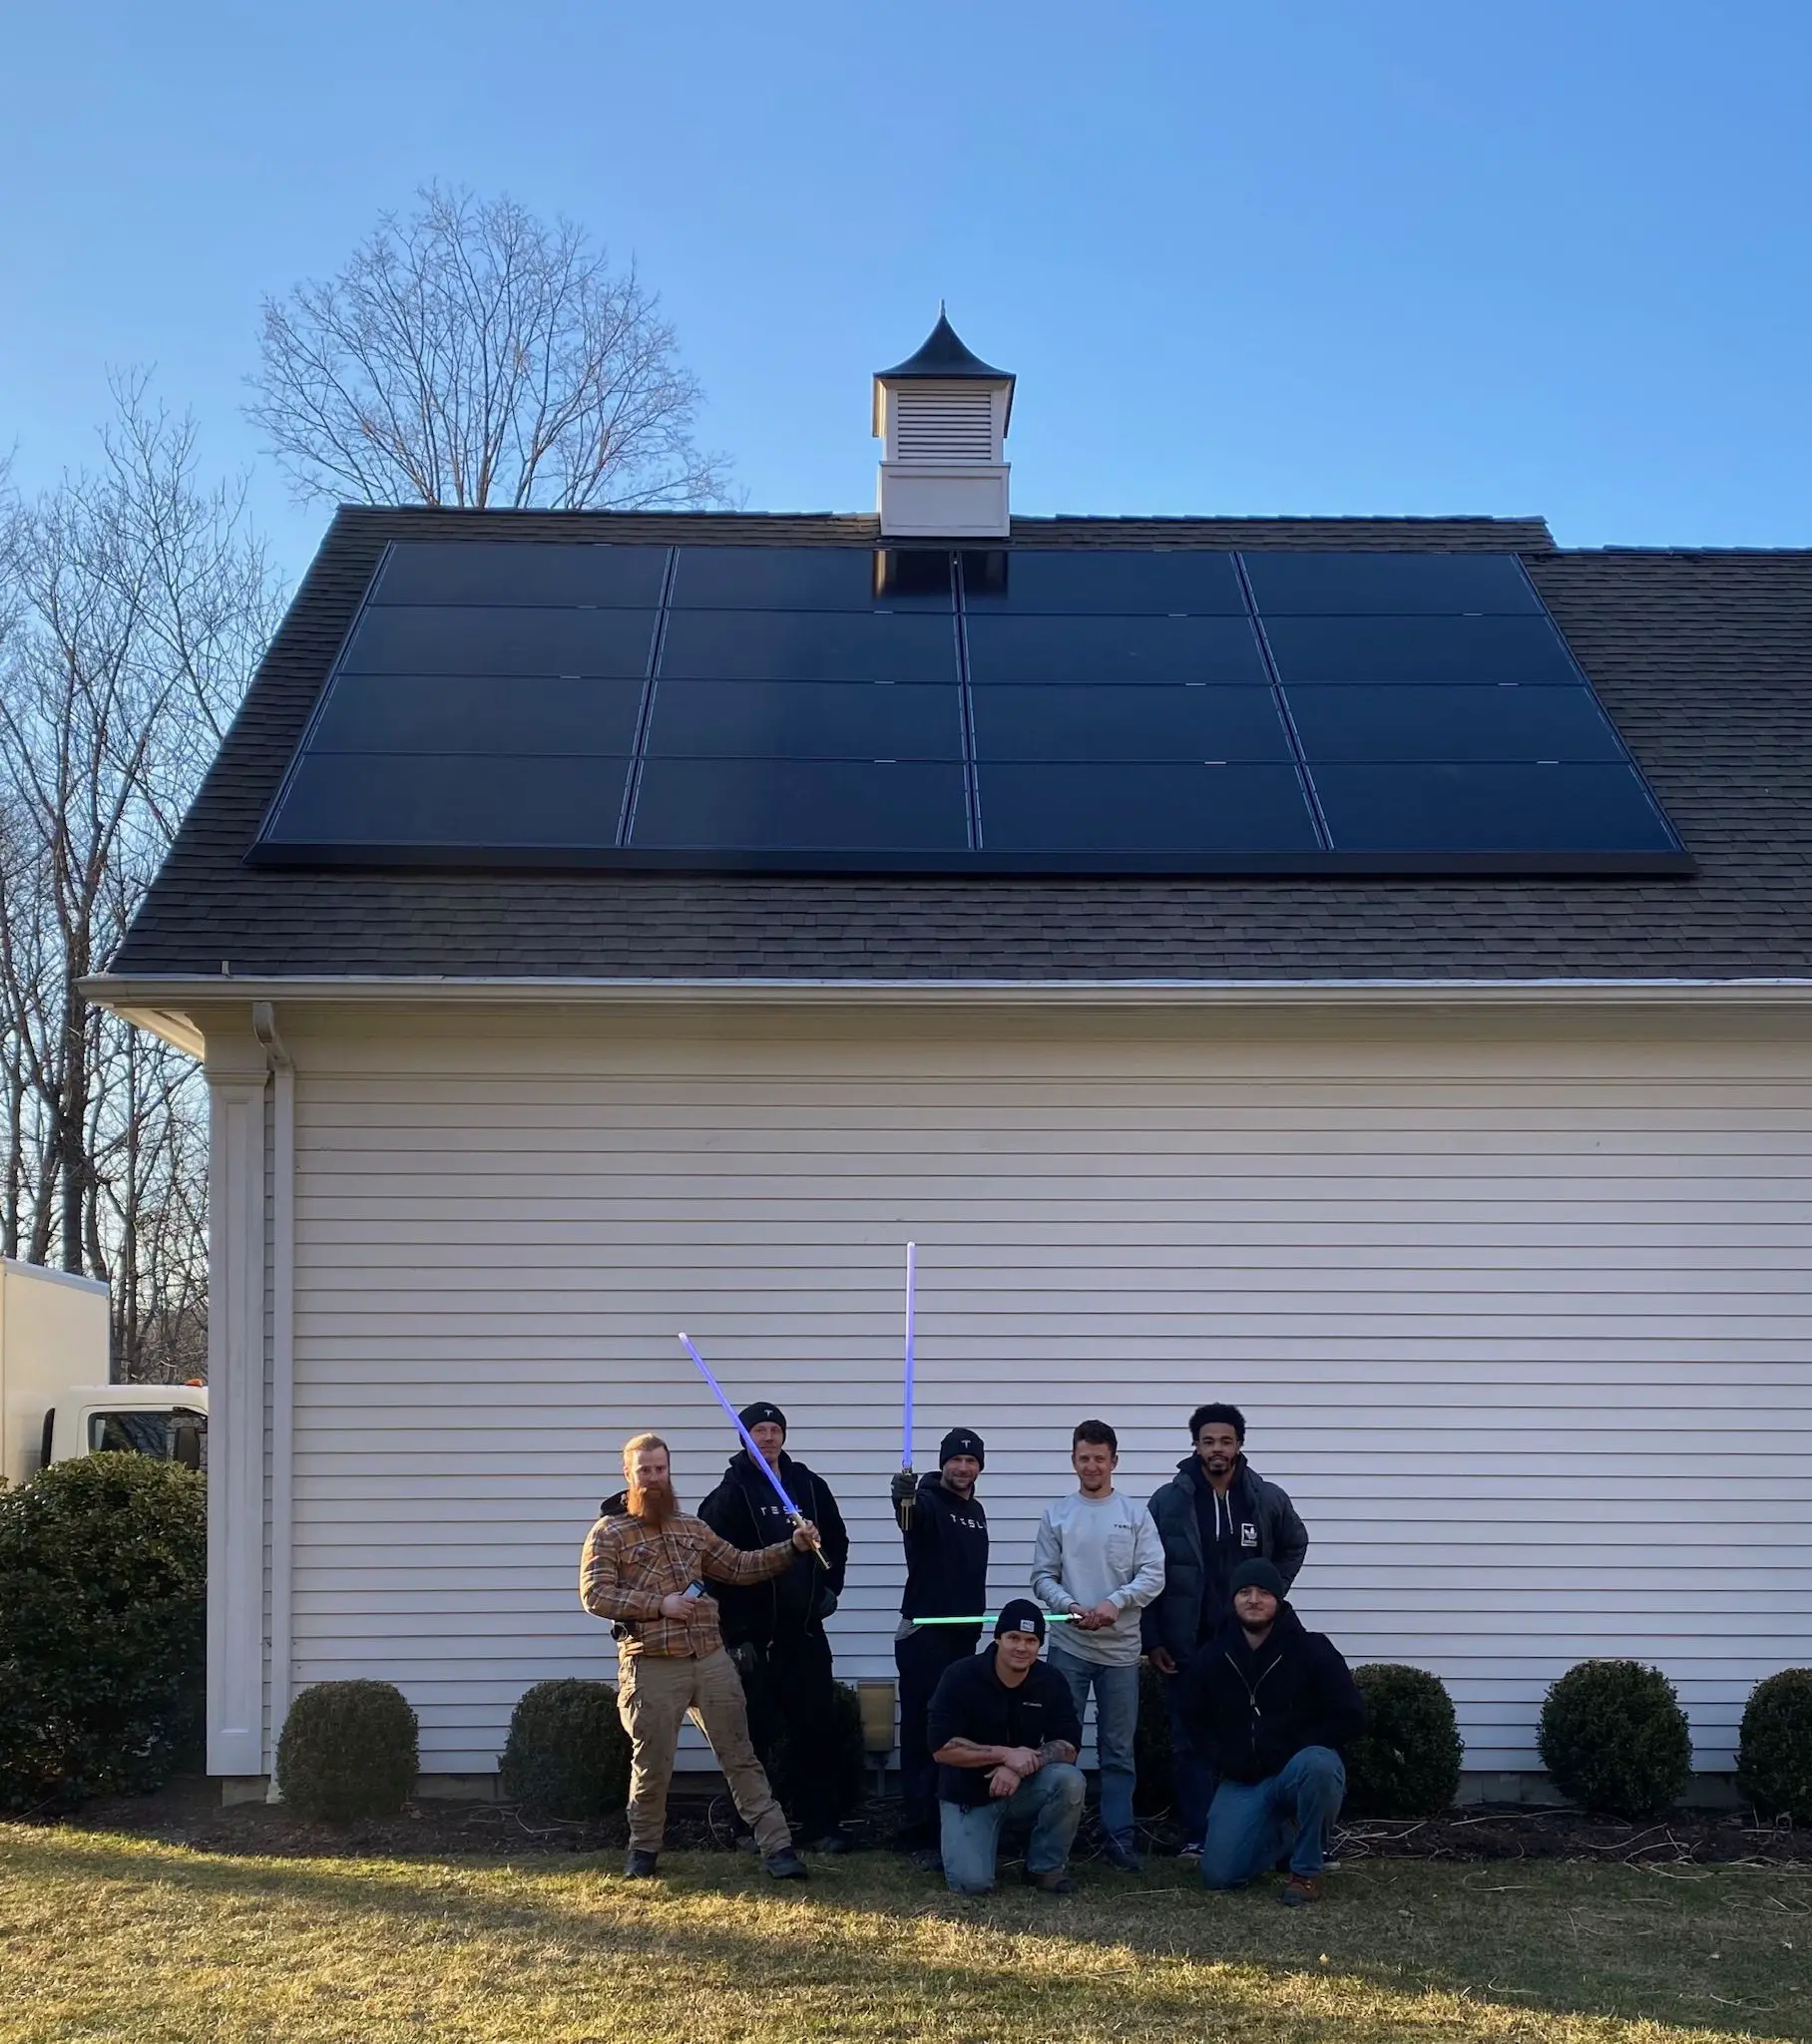 MAKING PROGRESS! One more solar roof installed in Connecticut in 2020 ...